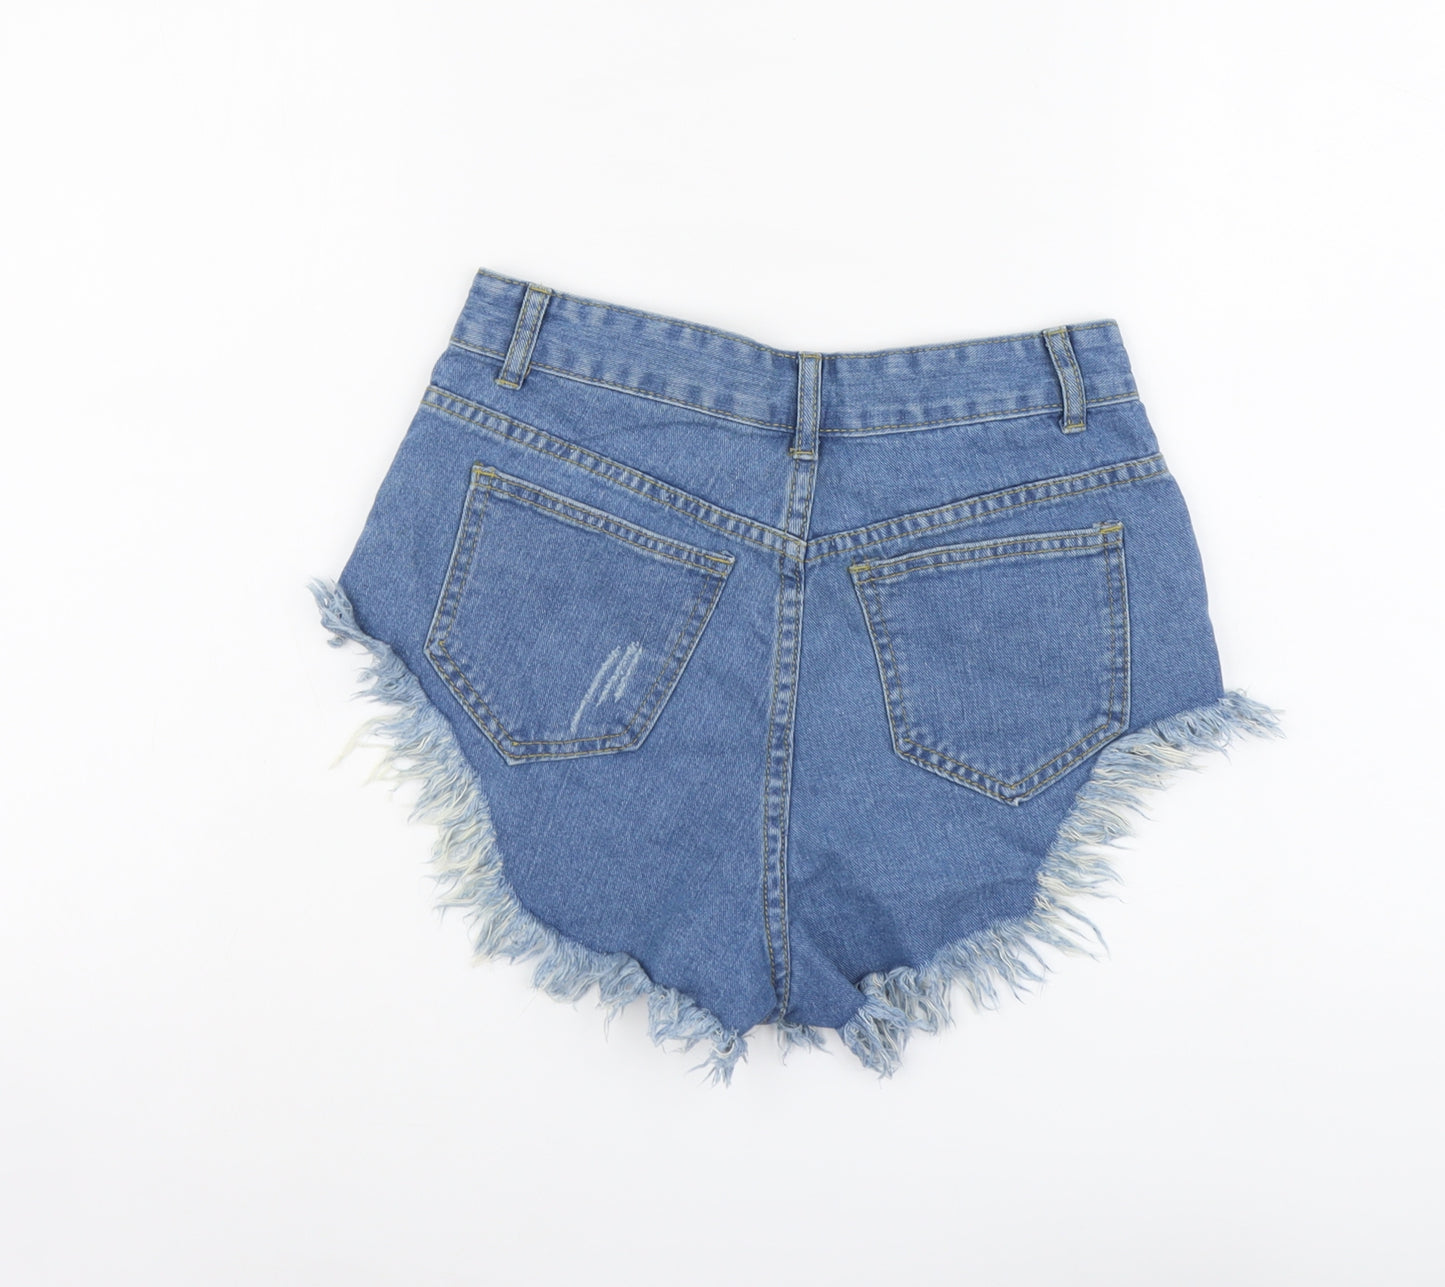 SheIn Womens Blue Cotton Hot Pants Shorts Size XS L3 in Regular Button - Distressed